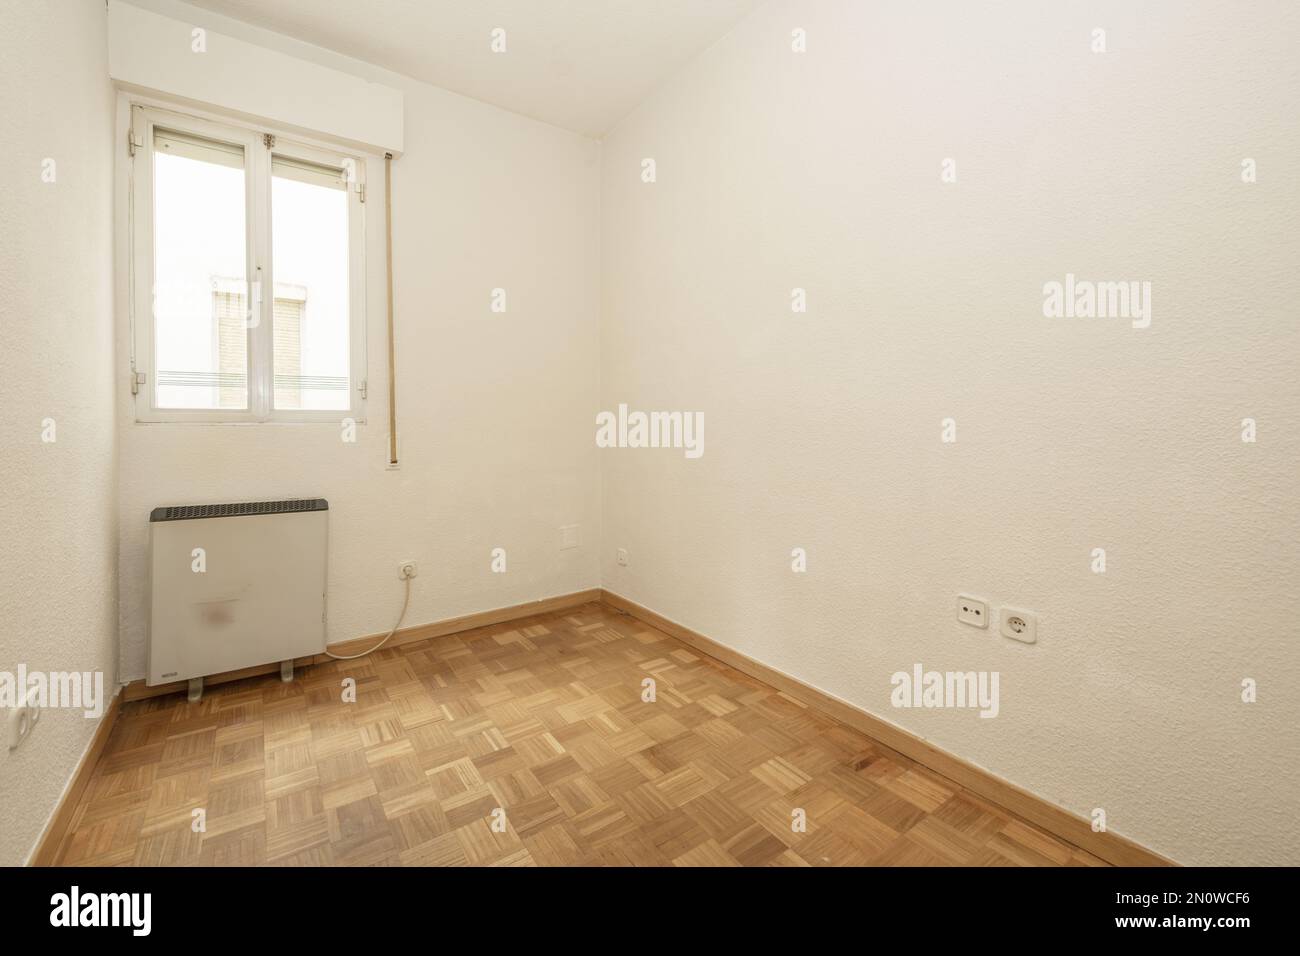 Empty room with gotelet white painted walls, white aluminum windows with electric heat accumulator below and oak parquet slatted floors laid in checke Stock Photo